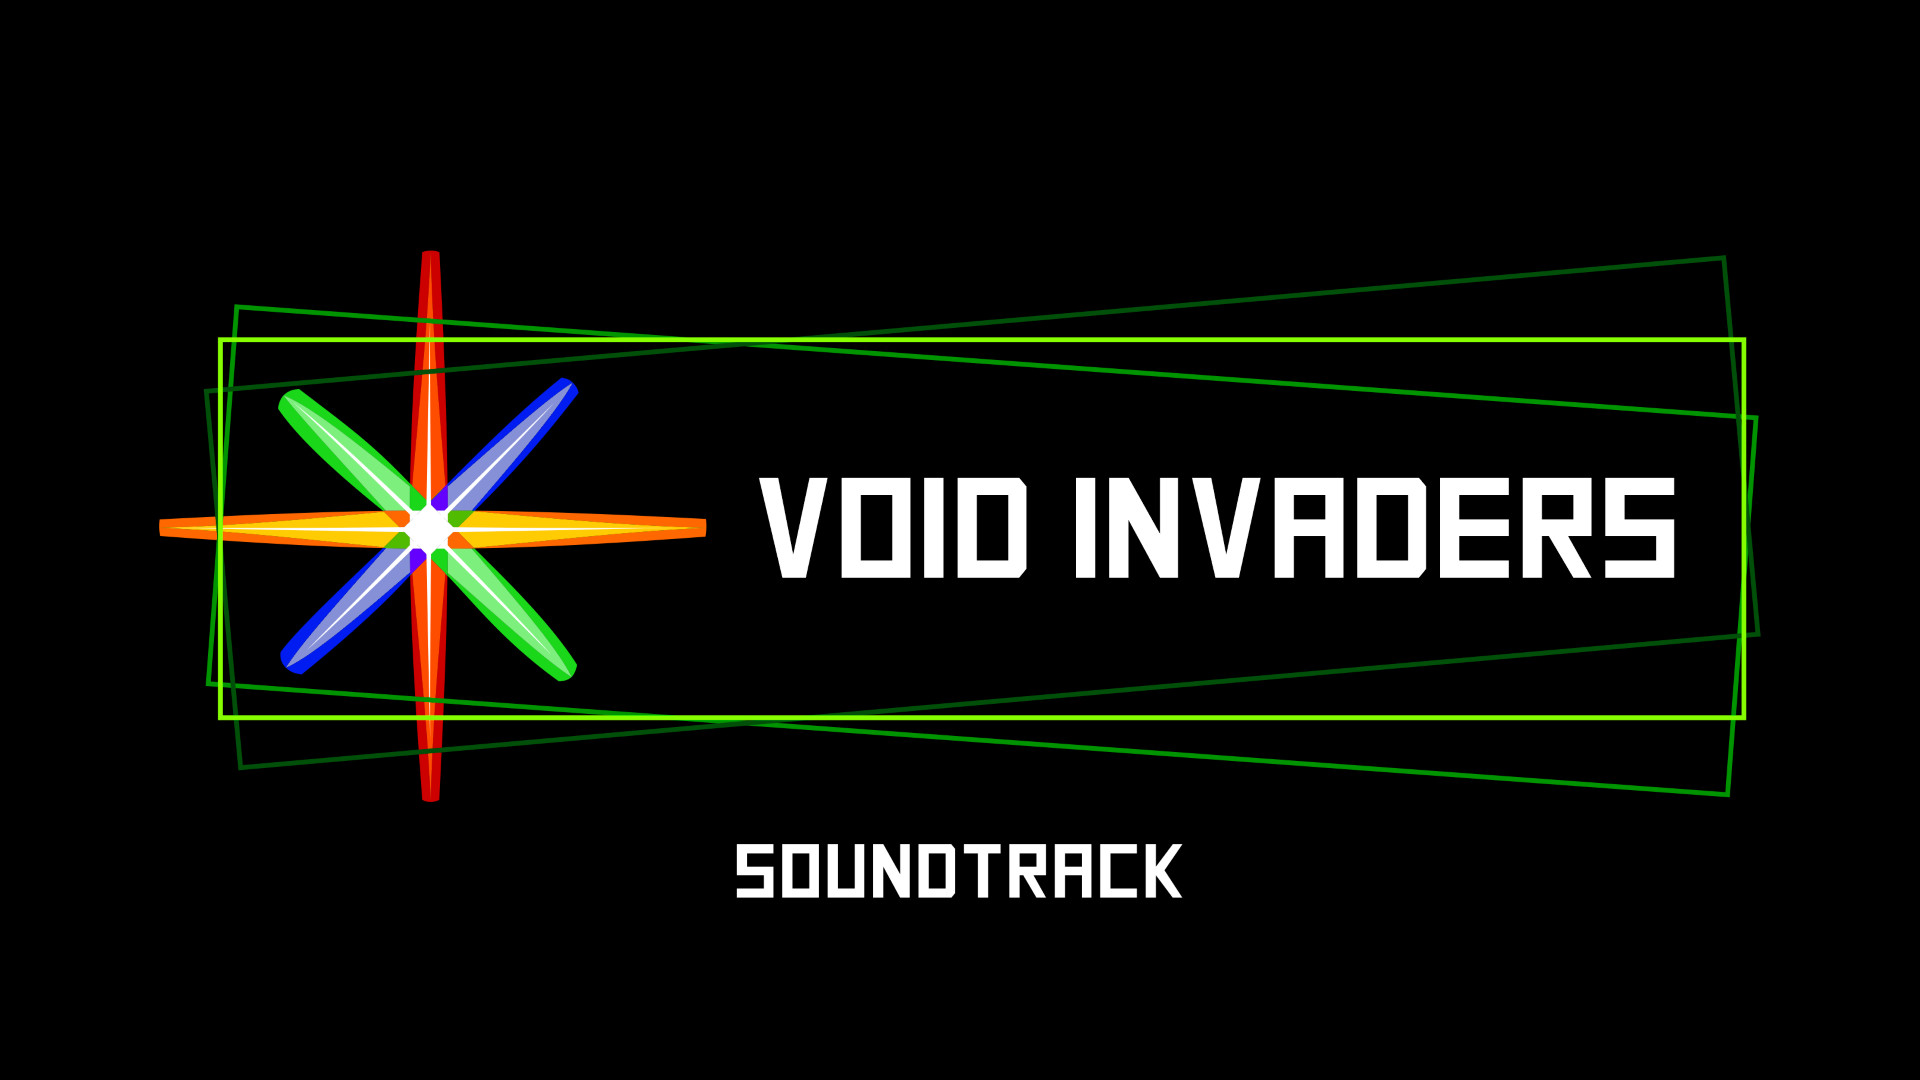 Void Invaders - Soundtrack Featured Screenshot #1